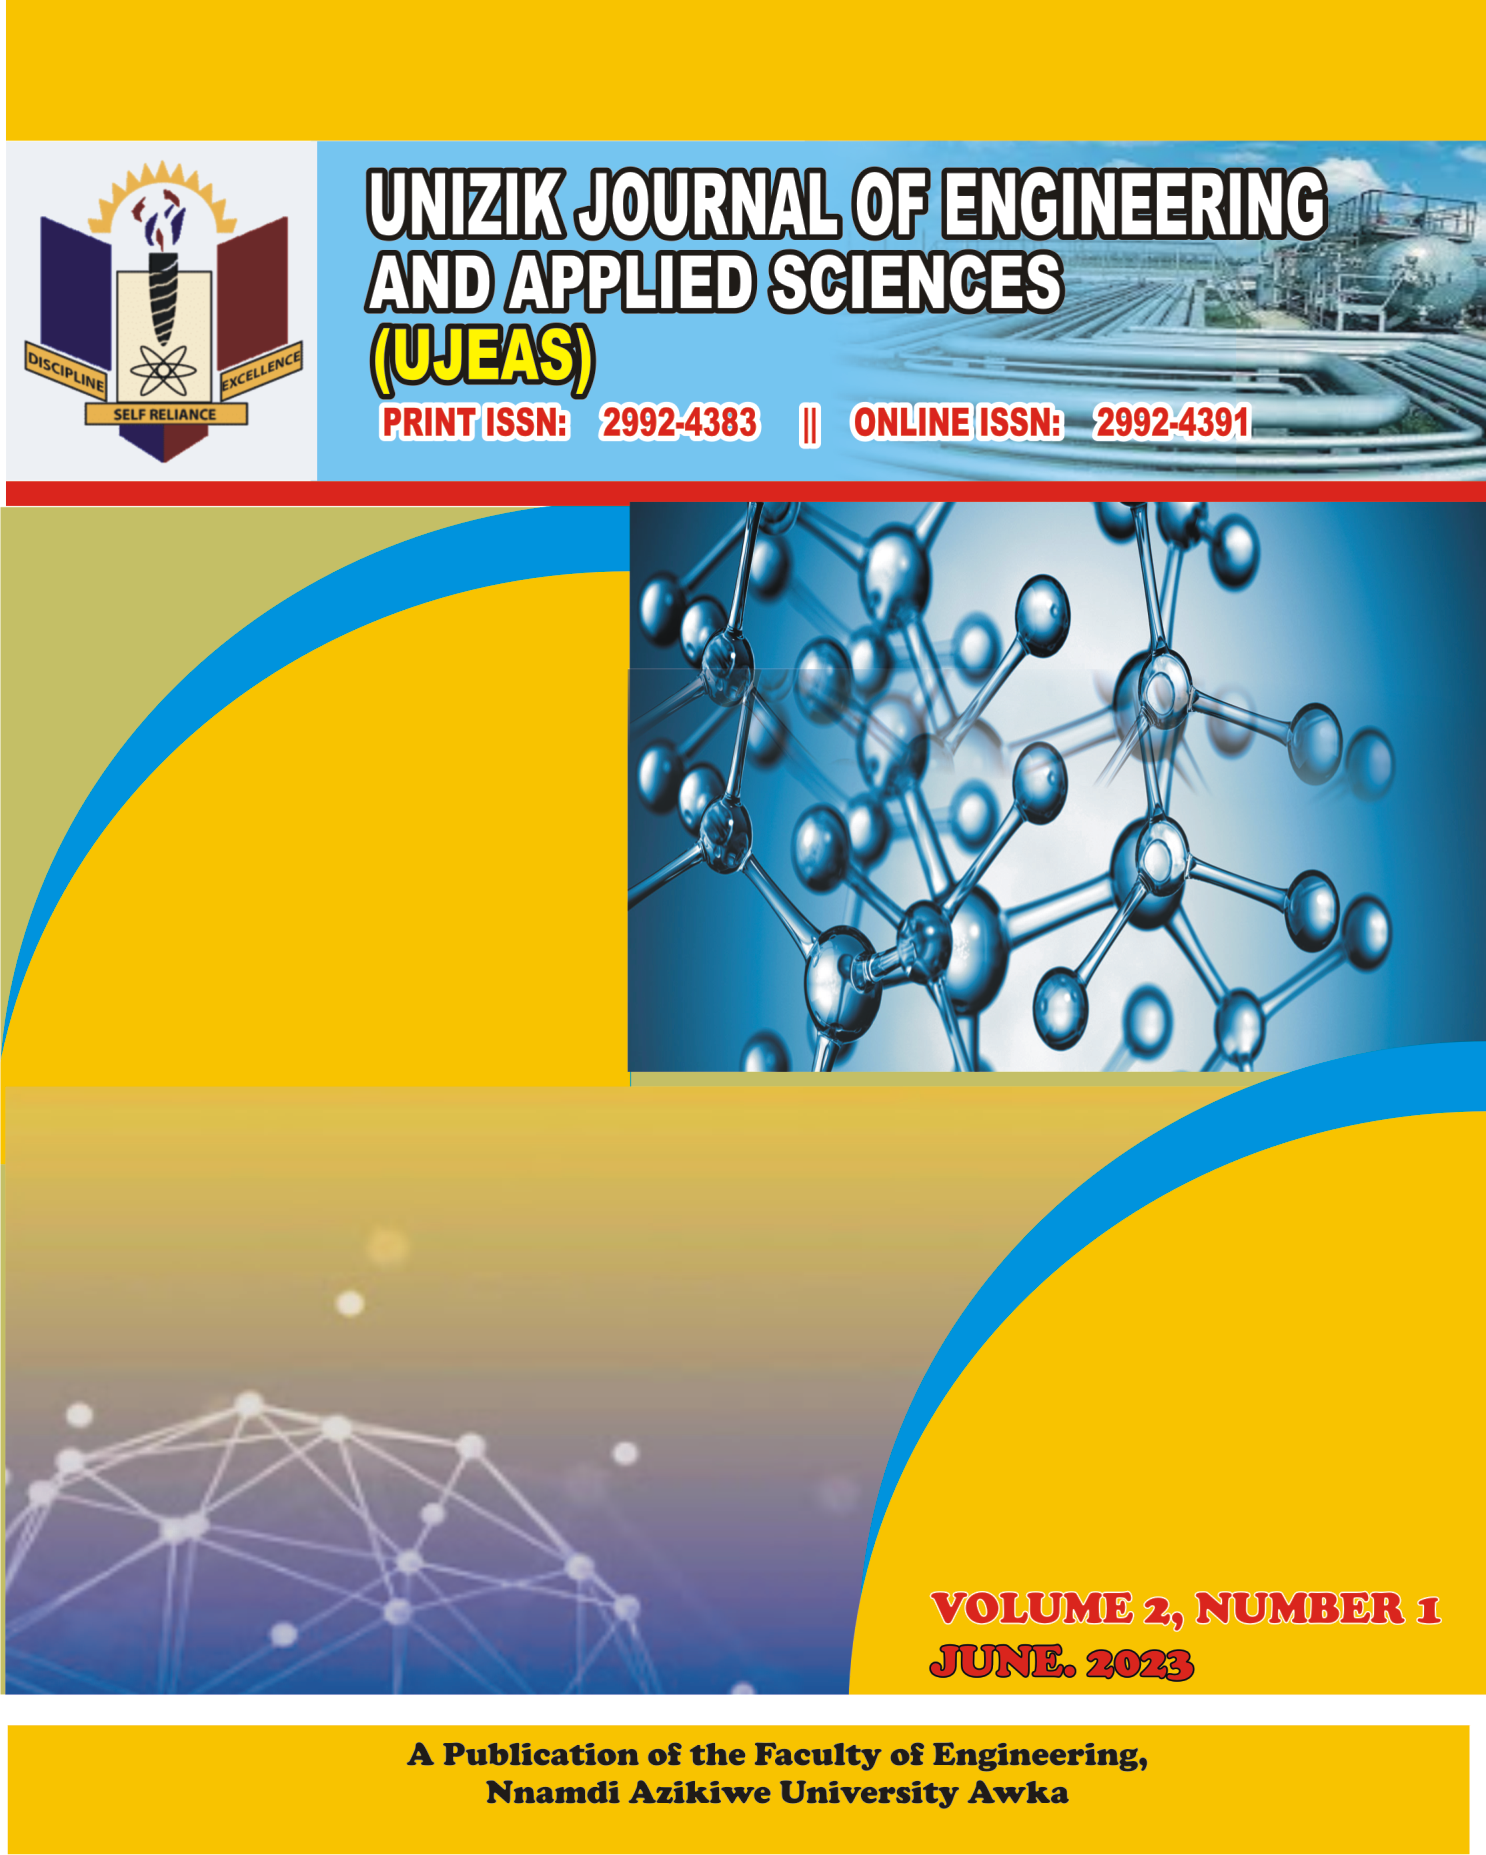 					View Vol. 2 No. 1 (2023): UNIZIK Journal of Engineering and Applied Sciences
				